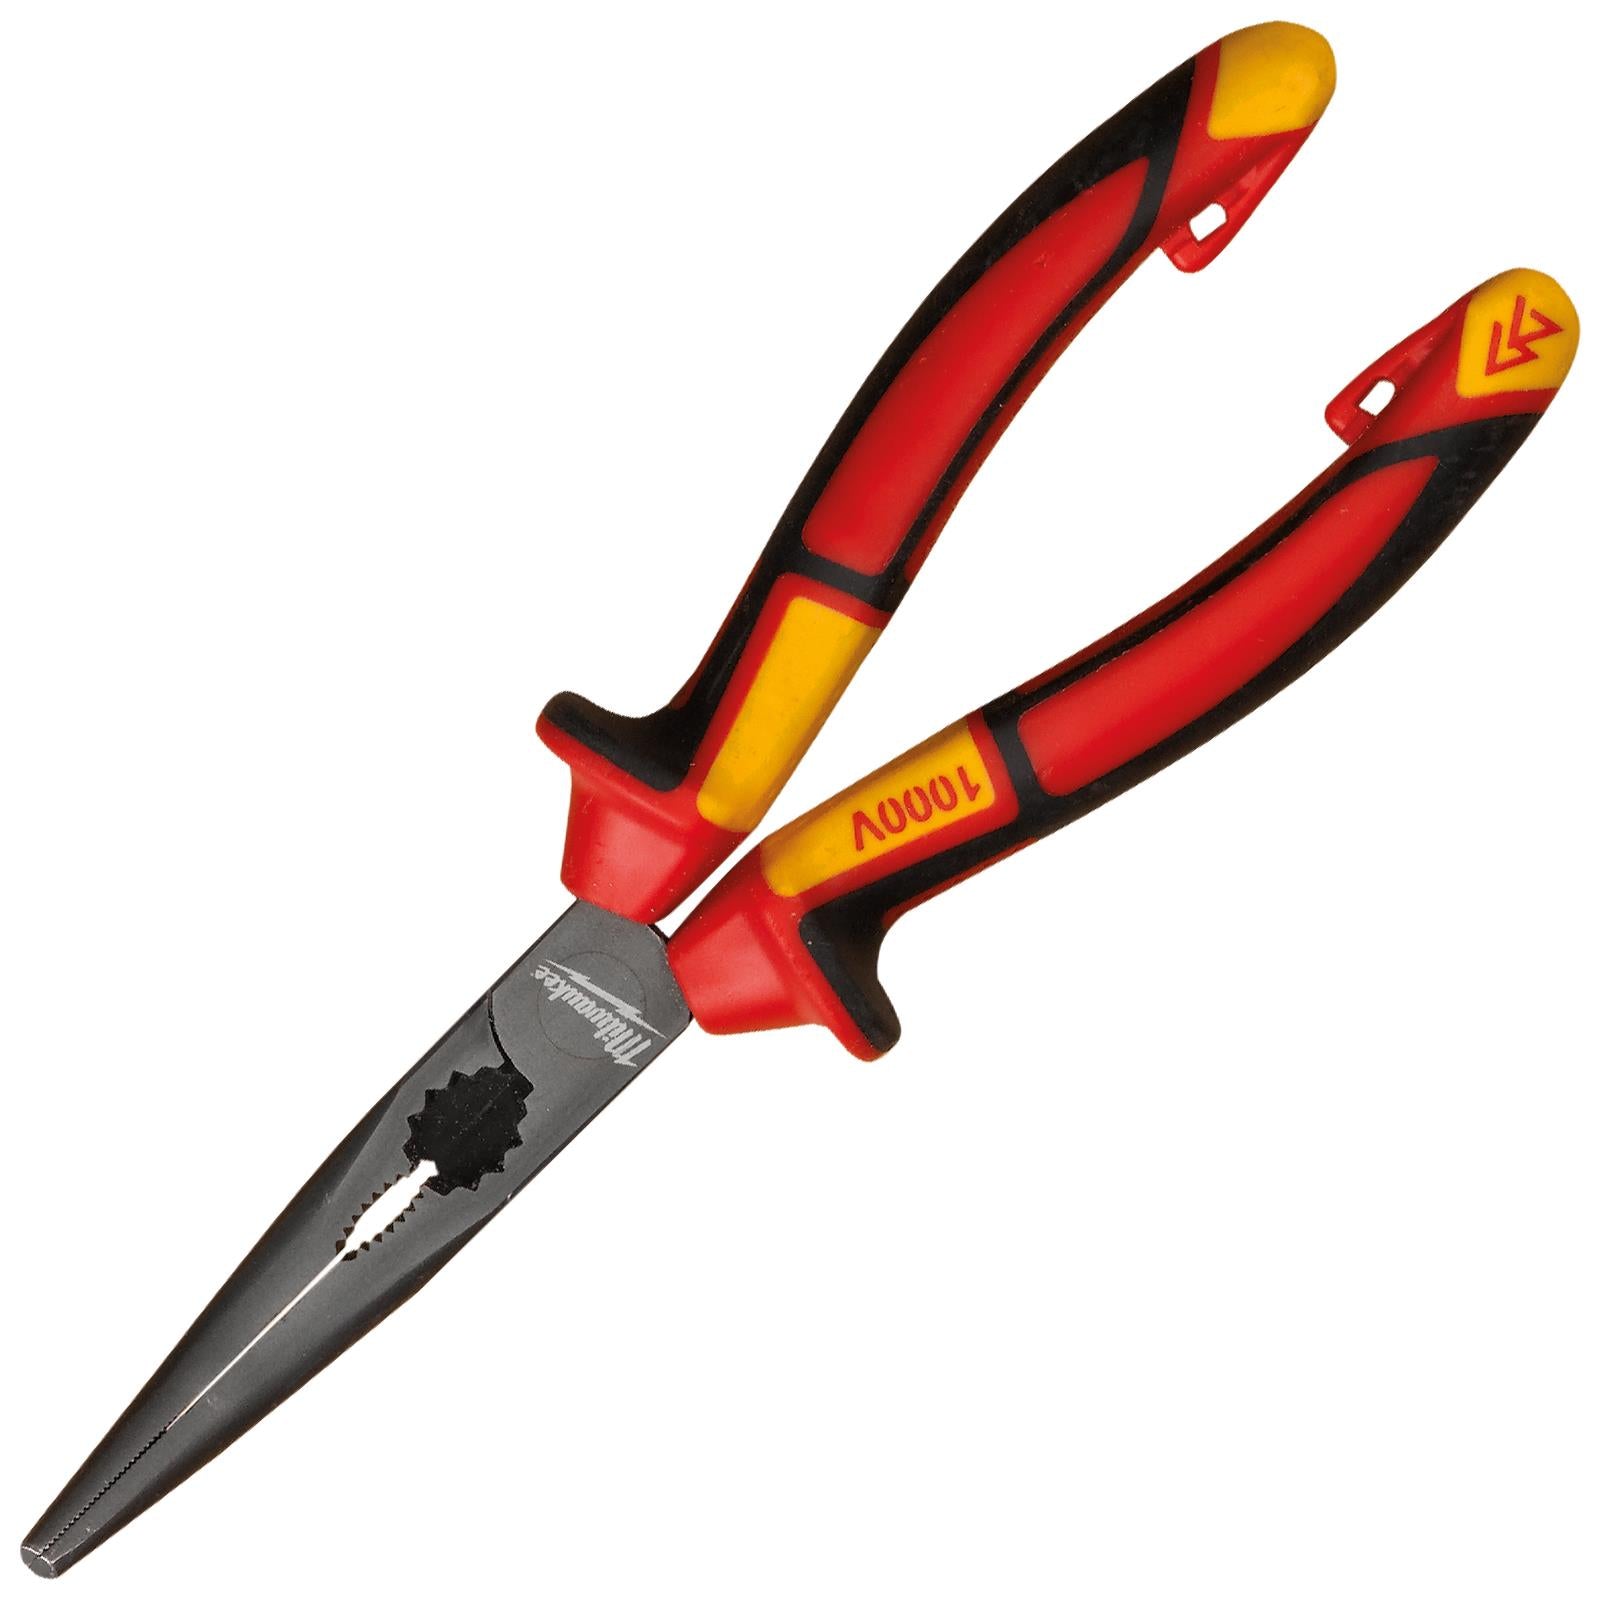 Milwaukee VDE Long 45° Round Nose Pliers 205mm Insulated 10,000V